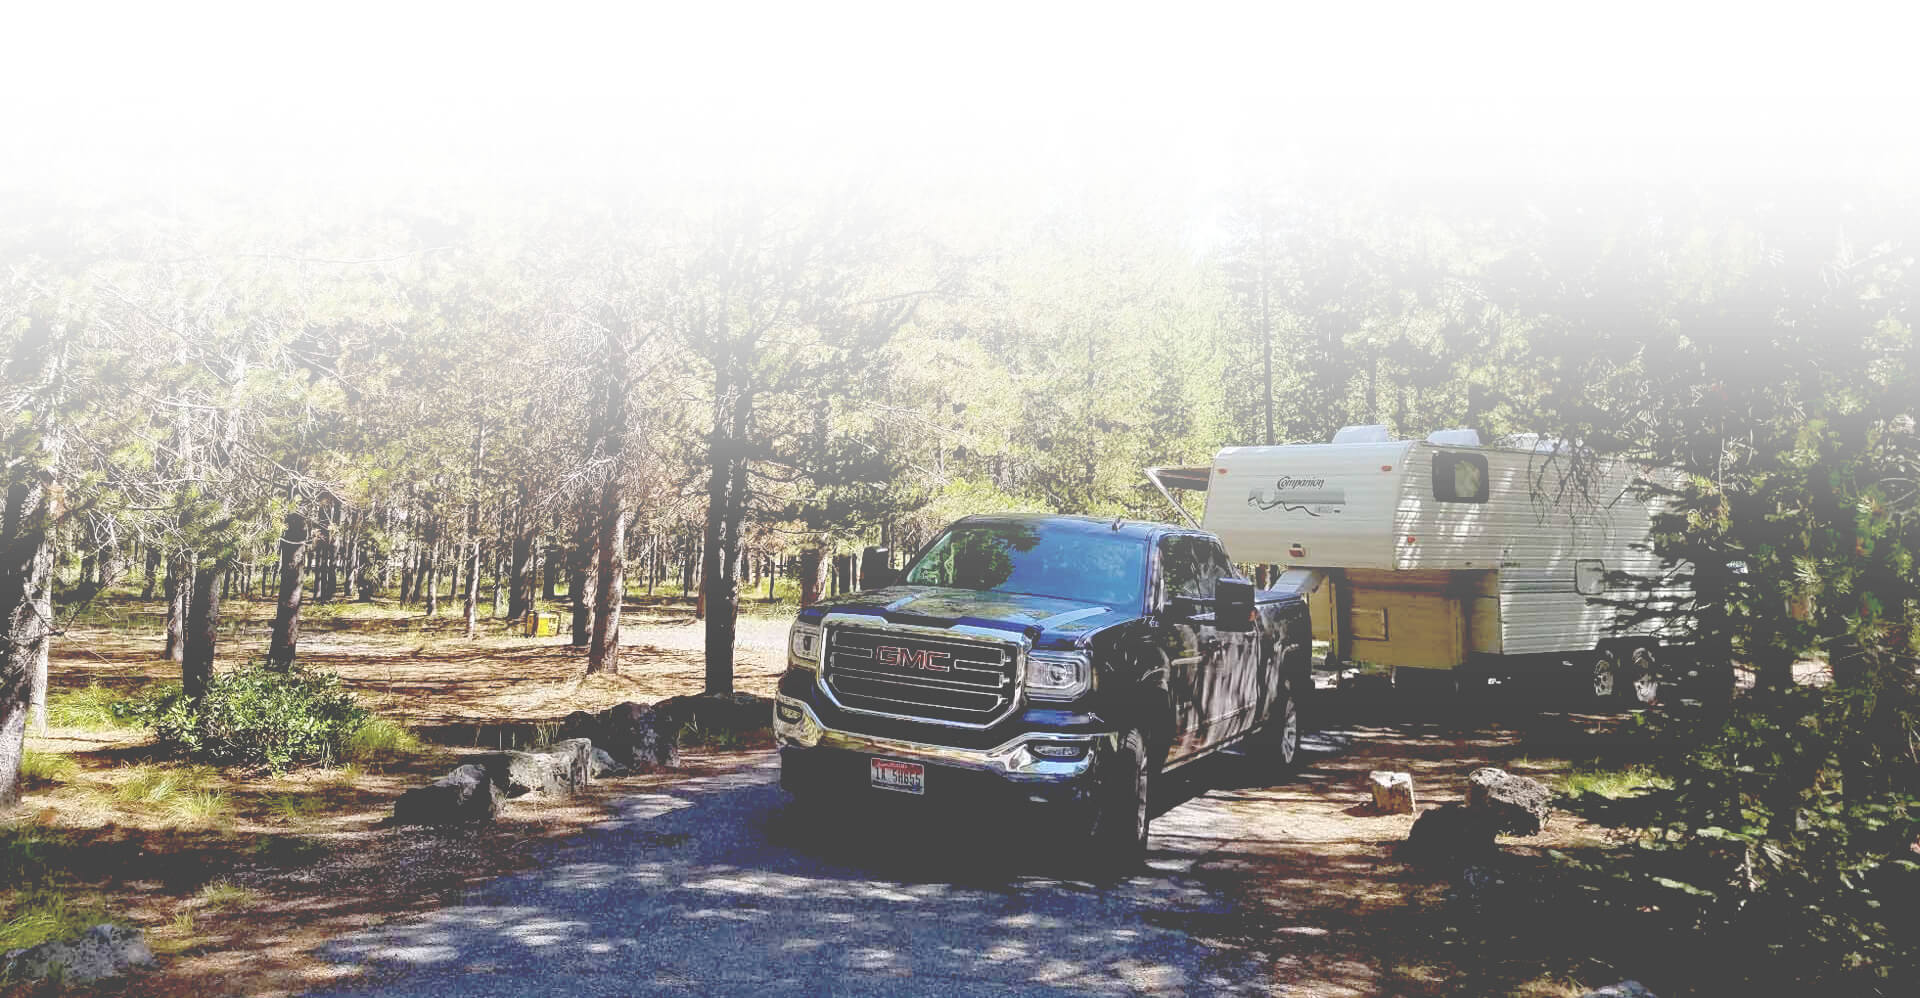 RV and truck in a campsite in the woods